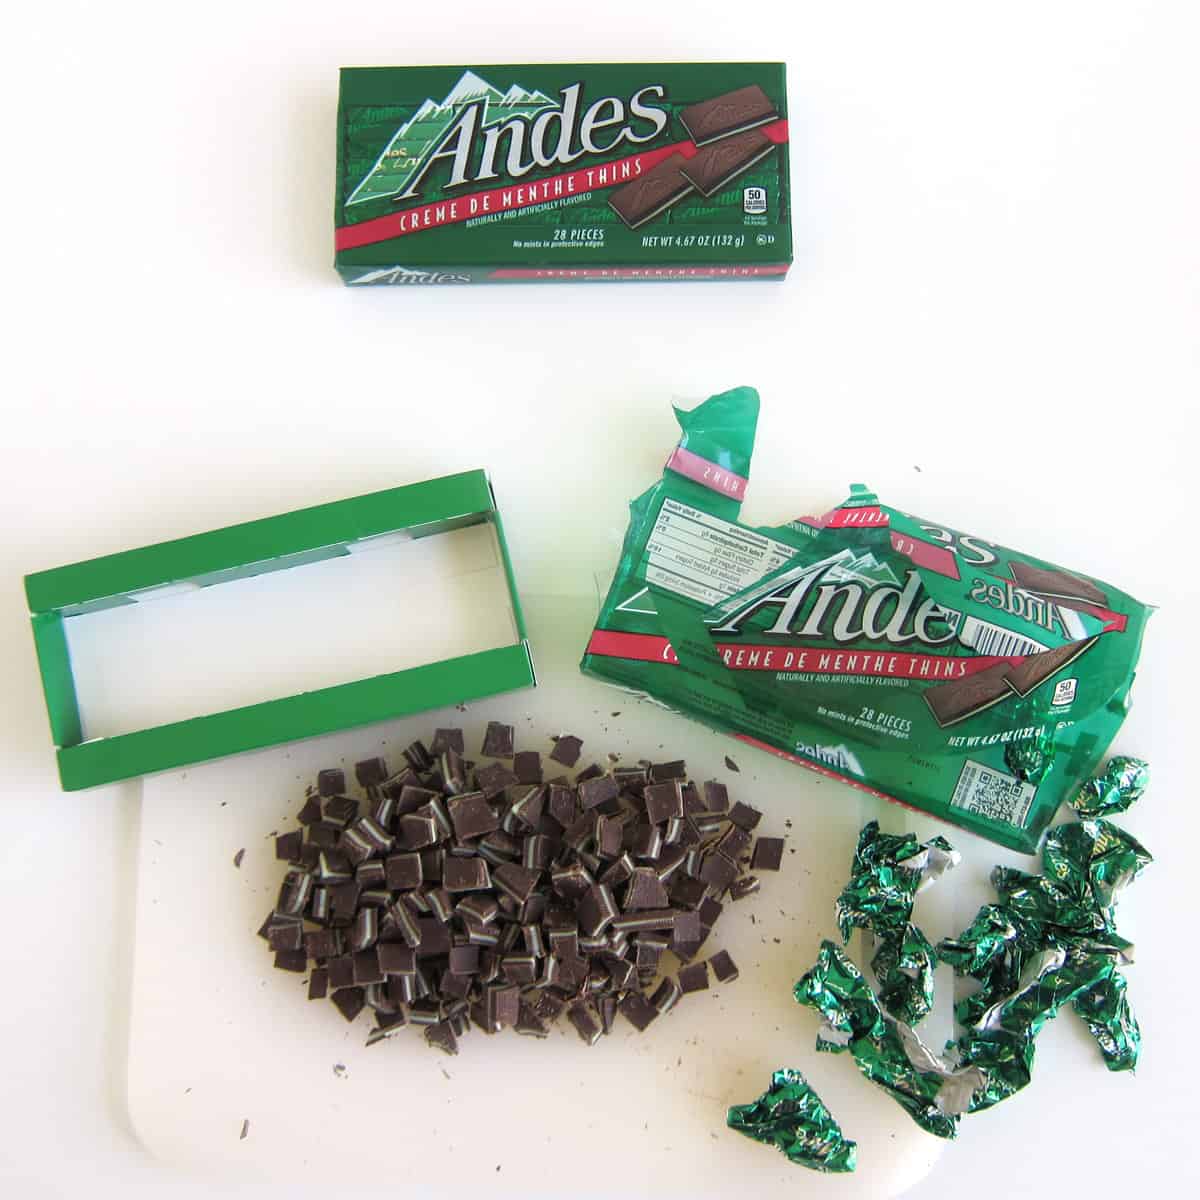 1 package of 28 Andes Mints and a package of Andes Mints unwrapped and chopped into small pieces